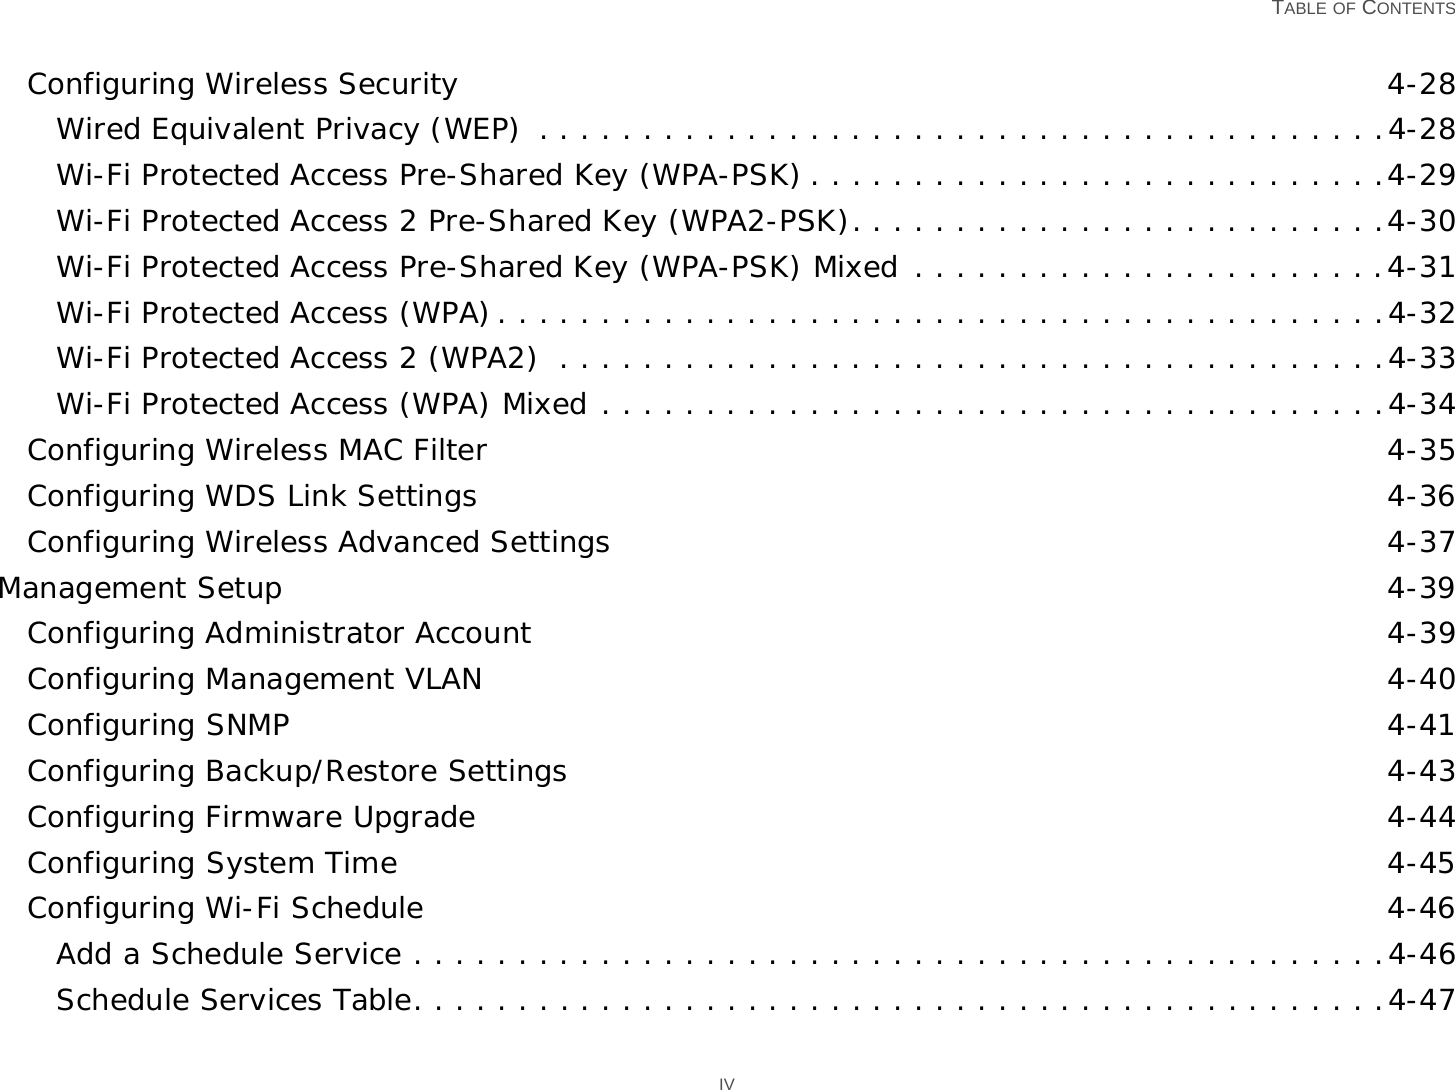   TABLE OF CONTENTS IVConfiguring Wireless Security 4-28Wired Equivalent Privacy (WEP)  . . . . . . . . . . . . . . . . . . . . . . . . . . . . . . . . . . . . . . . . .4-28Wi-Fi Protected Access Pre-Shared Key (WPA-PSK) . . . . . . . . . . . . . . . . . . . . . . . . . . . .4-29Wi-Fi Protected Access 2 Pre-Shared Key (WPA2-PSK). . . . . . . . . . . . . . . . . . . . . . . . . .4-30Wi-Fi Protected Access Pre-Shared Key (WPA-PSK) Mixed . . . . . . . . . . . . . . . . . . . . . . .4-31Wi-Fi Protected Access (WPA). . . . . . . . . . . . . . . . . . . . . . . . . . . . . . . . . . . . . . . . . . .4-32Wi-Fi Protected Access 2 (WPA2)  . . . . . . . . . . . . . . . . . . . . . . . . . . . . . . . . . . . . . . . .4-33Wi-Fi Protected Access (WPA) Mixed . . . . . . . . . . . . . . . . . . . . . . . . . . . . . . . . . . . . . .4-34Configuring Wireless MAC Filter 4-35Configuring WDS Link Settings 4-36Configuring Wireless Advanced Settings 4-37Management Setup 4-39Configuring Administrator Account 4-39Configuring Management VLAN 4-40Configuring SNMP 4-41Configuring Backup/Restore Settings 4-43Configuring Firmware Upgrade 4-44Configuring System Time 4-45Configuring Wi-Fi Schedule 4-46Add a Schedule Service . . . . . . . . . . . . . . . . . . . . . . . . . . . . . . . . . . . . . . . . . . . . . . .4-46Schedule Services Table. . . . . . . . . . . . . . . . . . . . . . . . . . . . . . . . . . . . . . . . . . . . . . .4-47